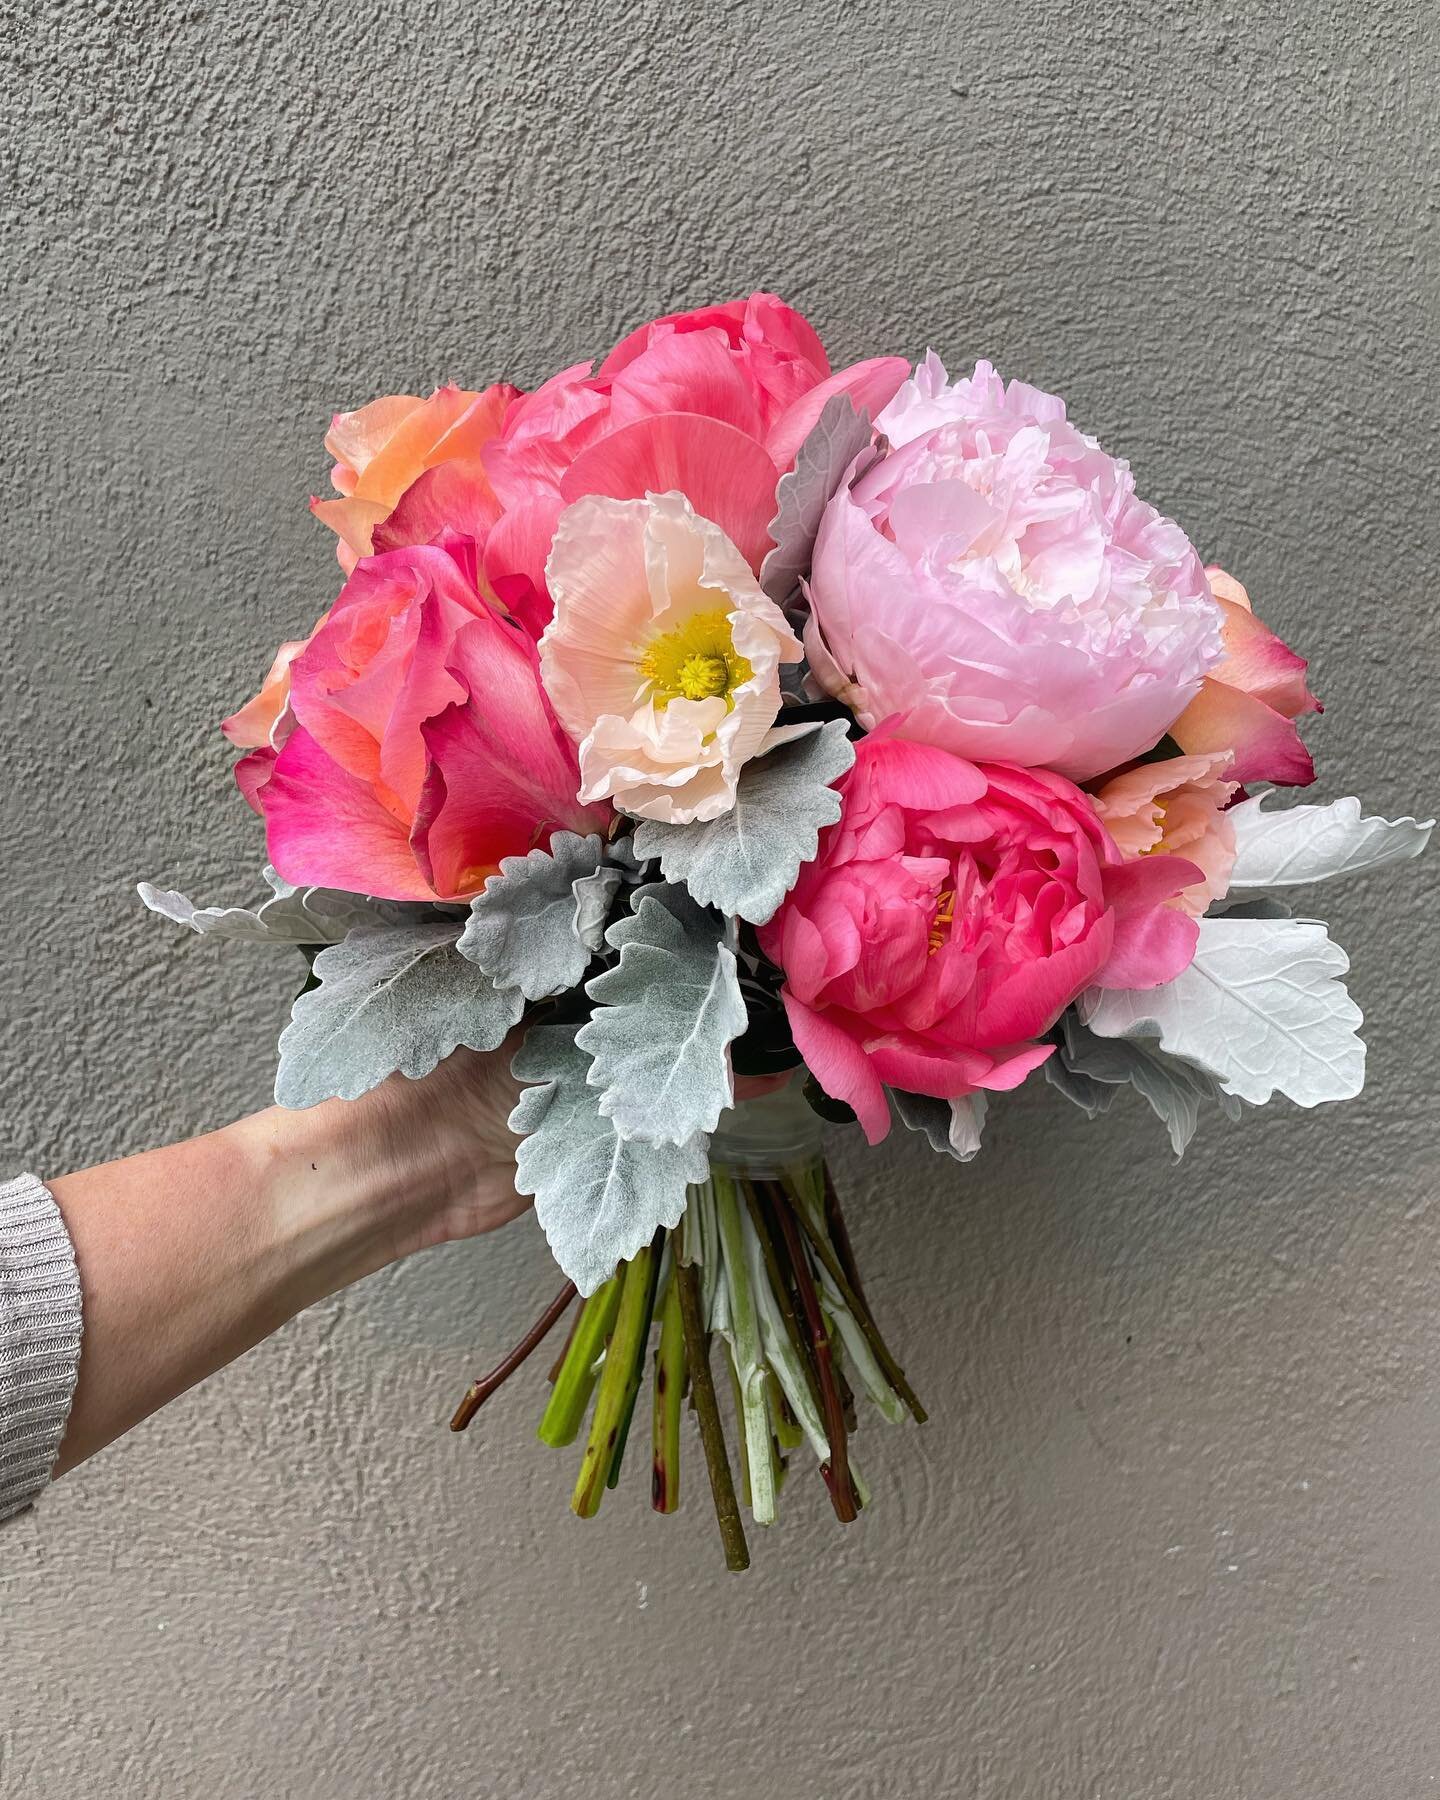 More beautiful wedding colours 💓💗💓💗💓💗💓💗💓💓💗💗
&bull;
&bull;
#banffflowers #banffflorists
#banffflorist #banffwedding #bride #peony #coral #pink #peach #florist #flowers #weddingflowers #bouquet #bridalbouquet #weddingflorist #flowerinspirat